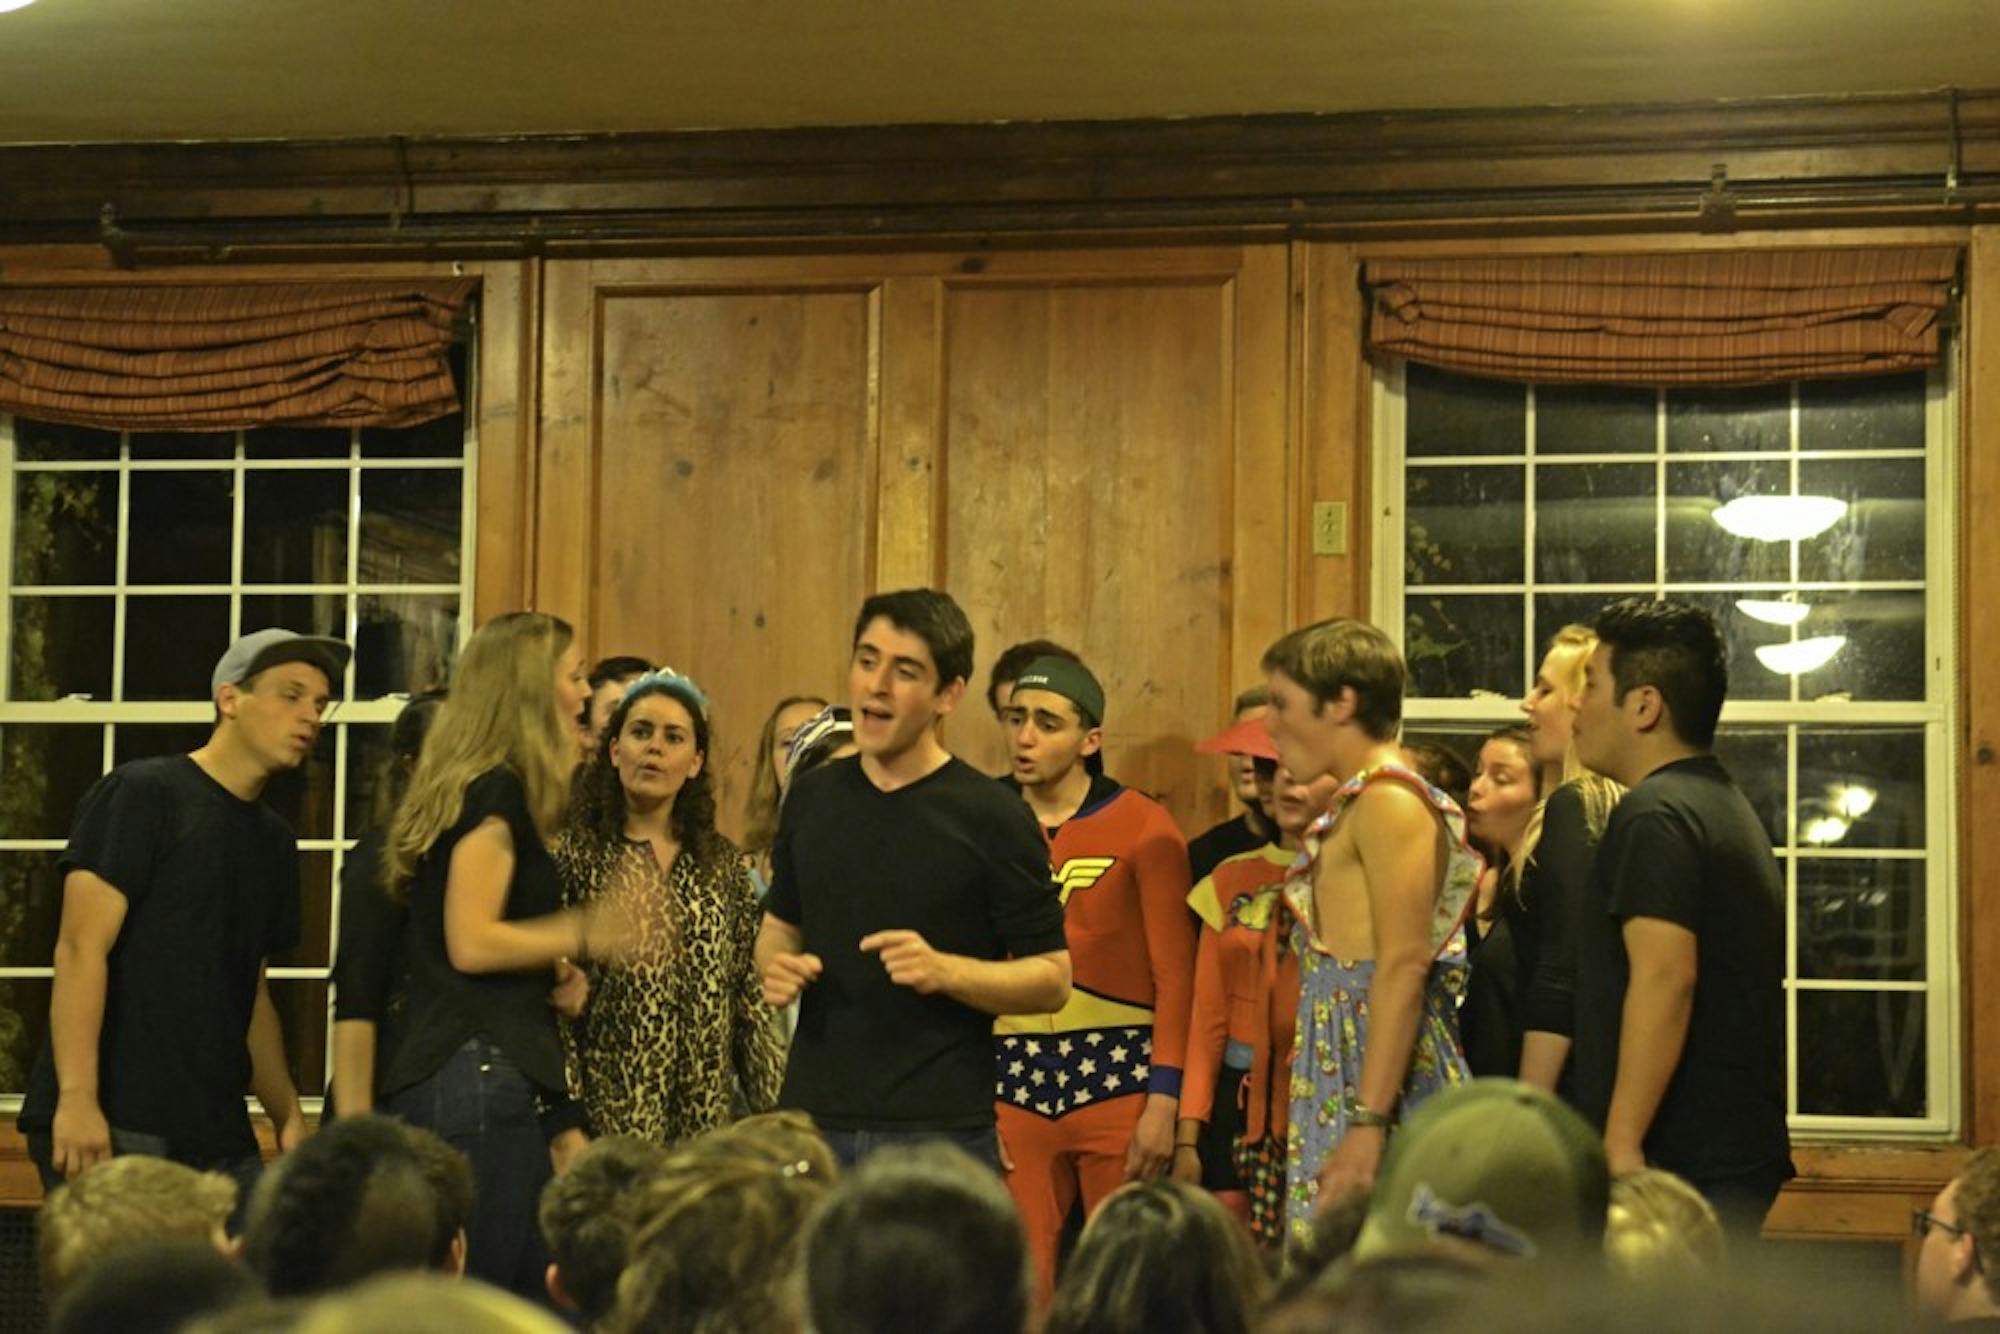 The Dodecaphonics performed at Chi Gamma Epsilon Monday night in a GLC-sponsored event.